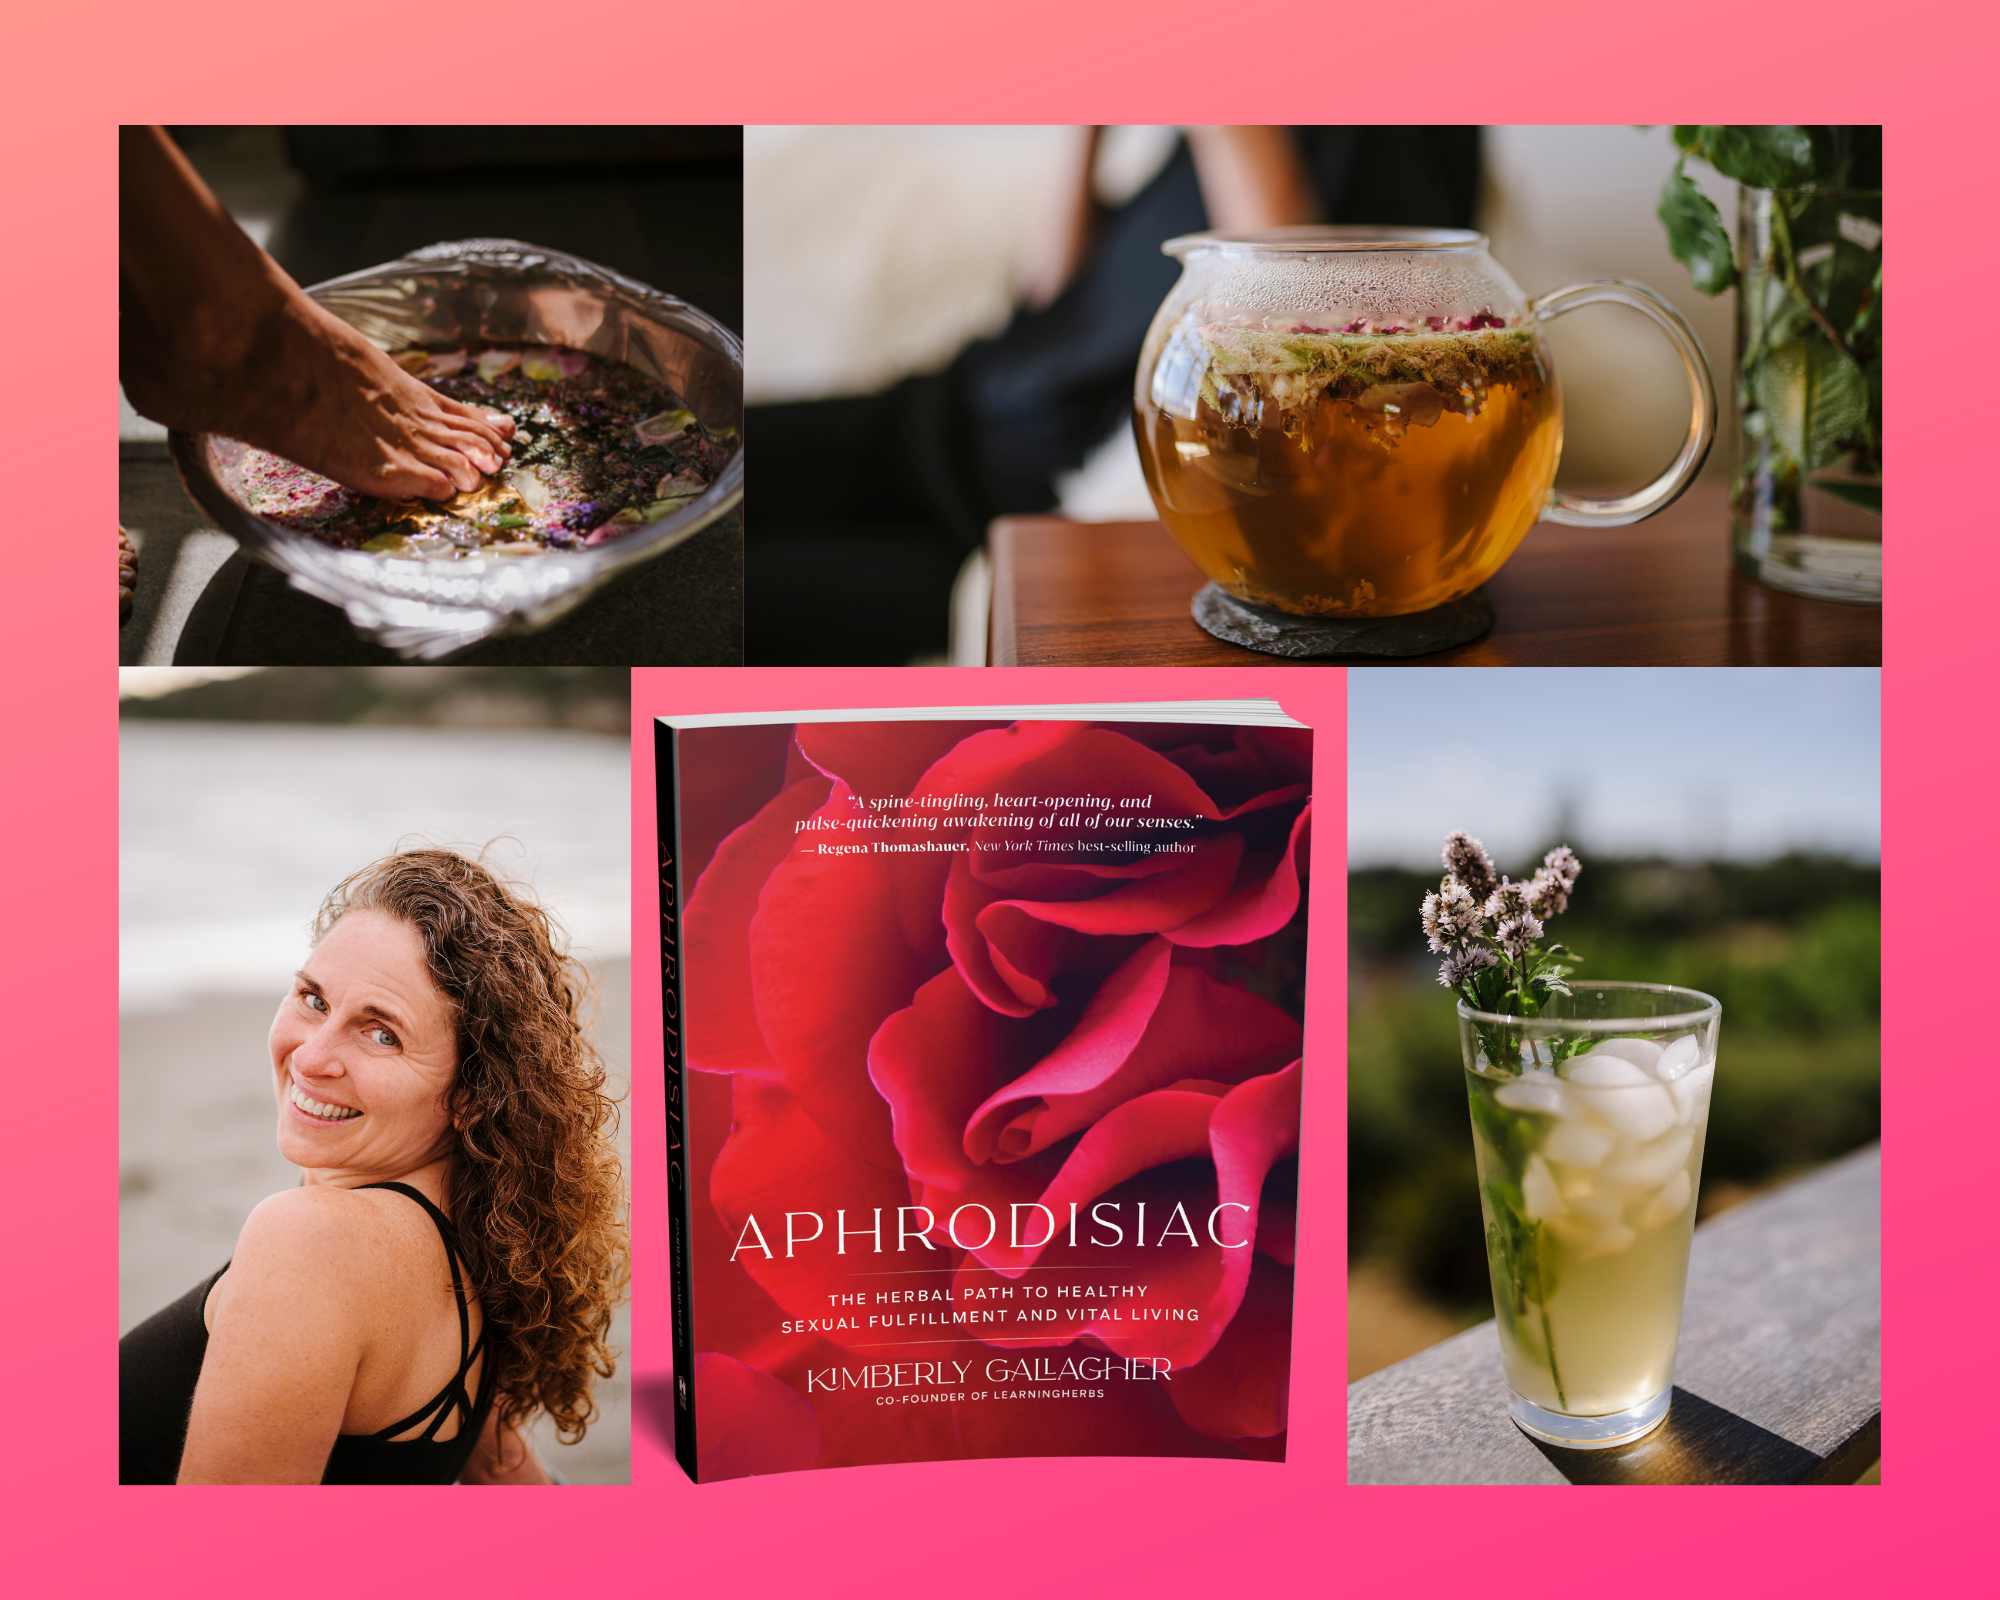 Bodymindspirit Podcast Episode 13: (Part 2) Interview with author and herbalist Kimberly Gallagher